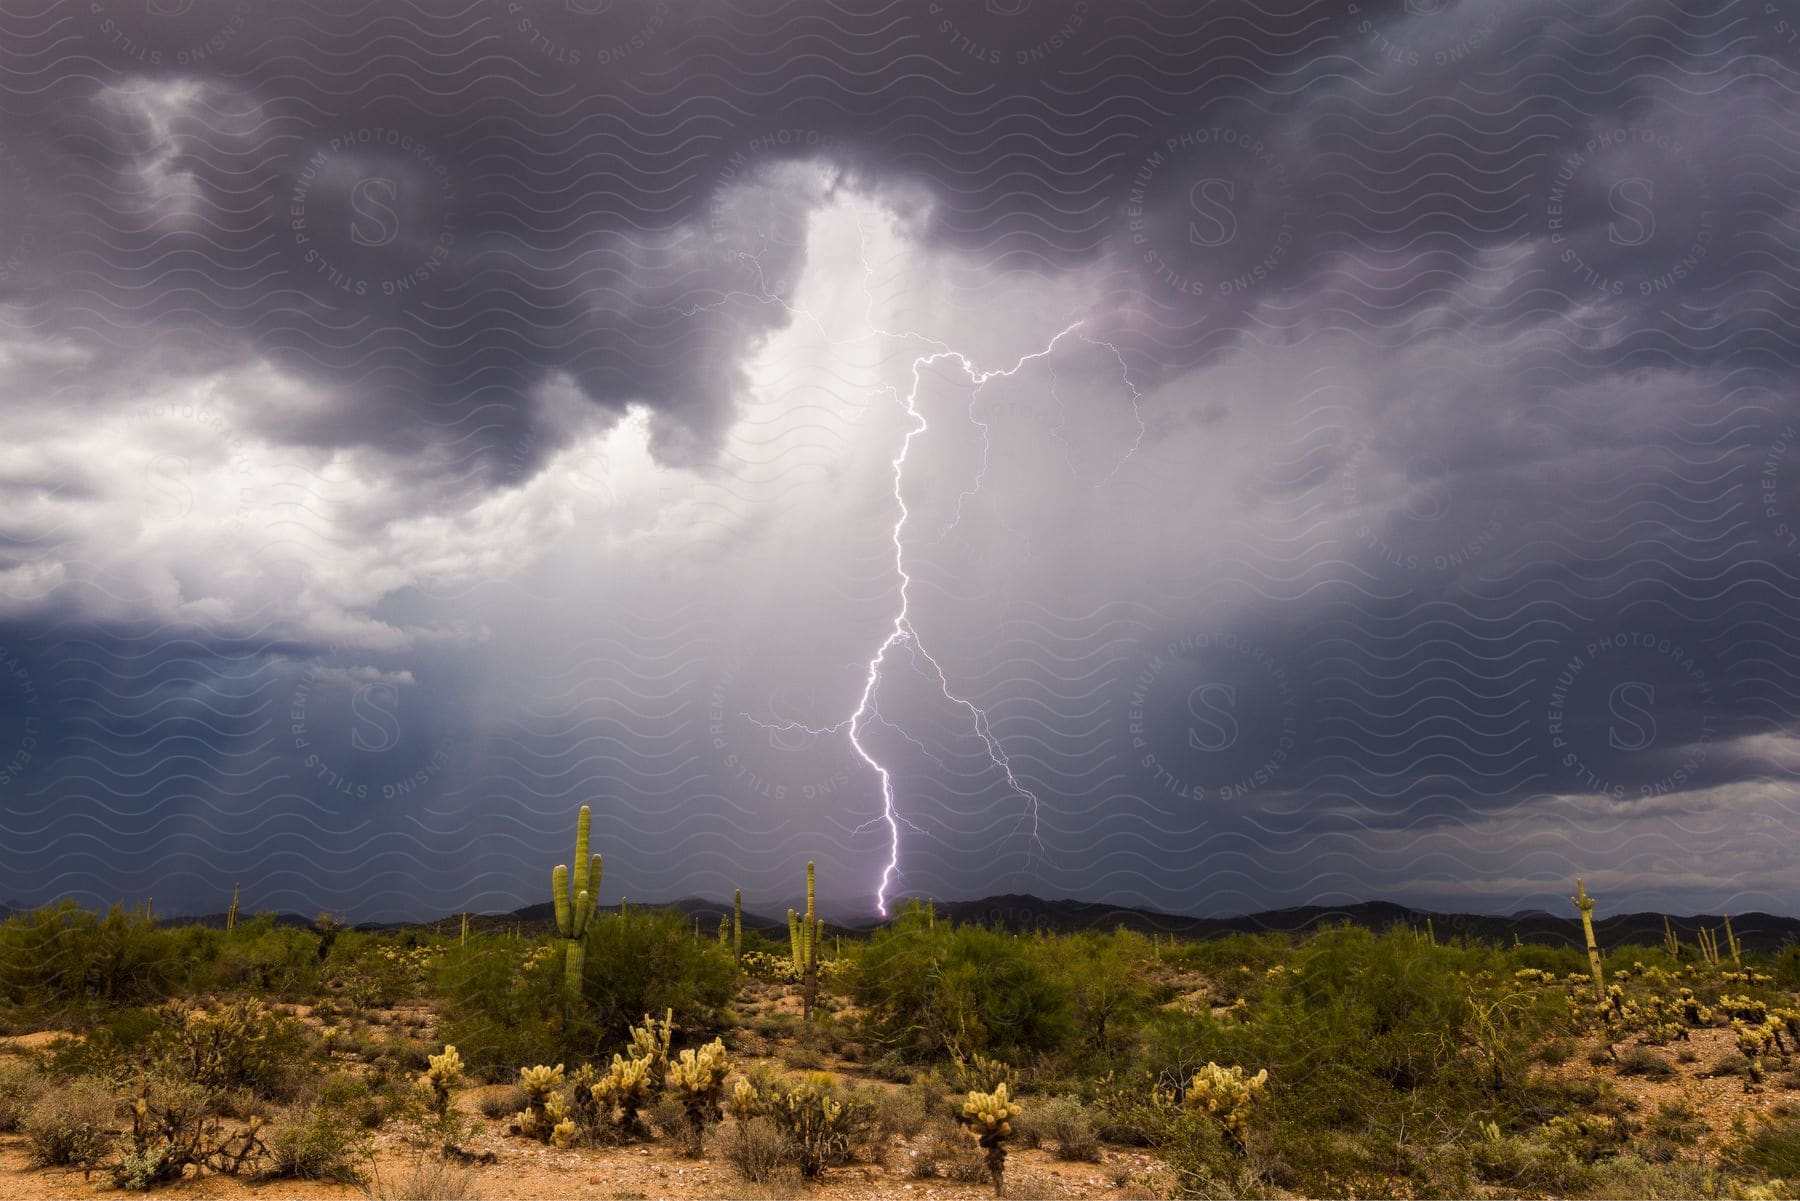 Lightning strikes from a stormy sky over the desert and mountains in the distance